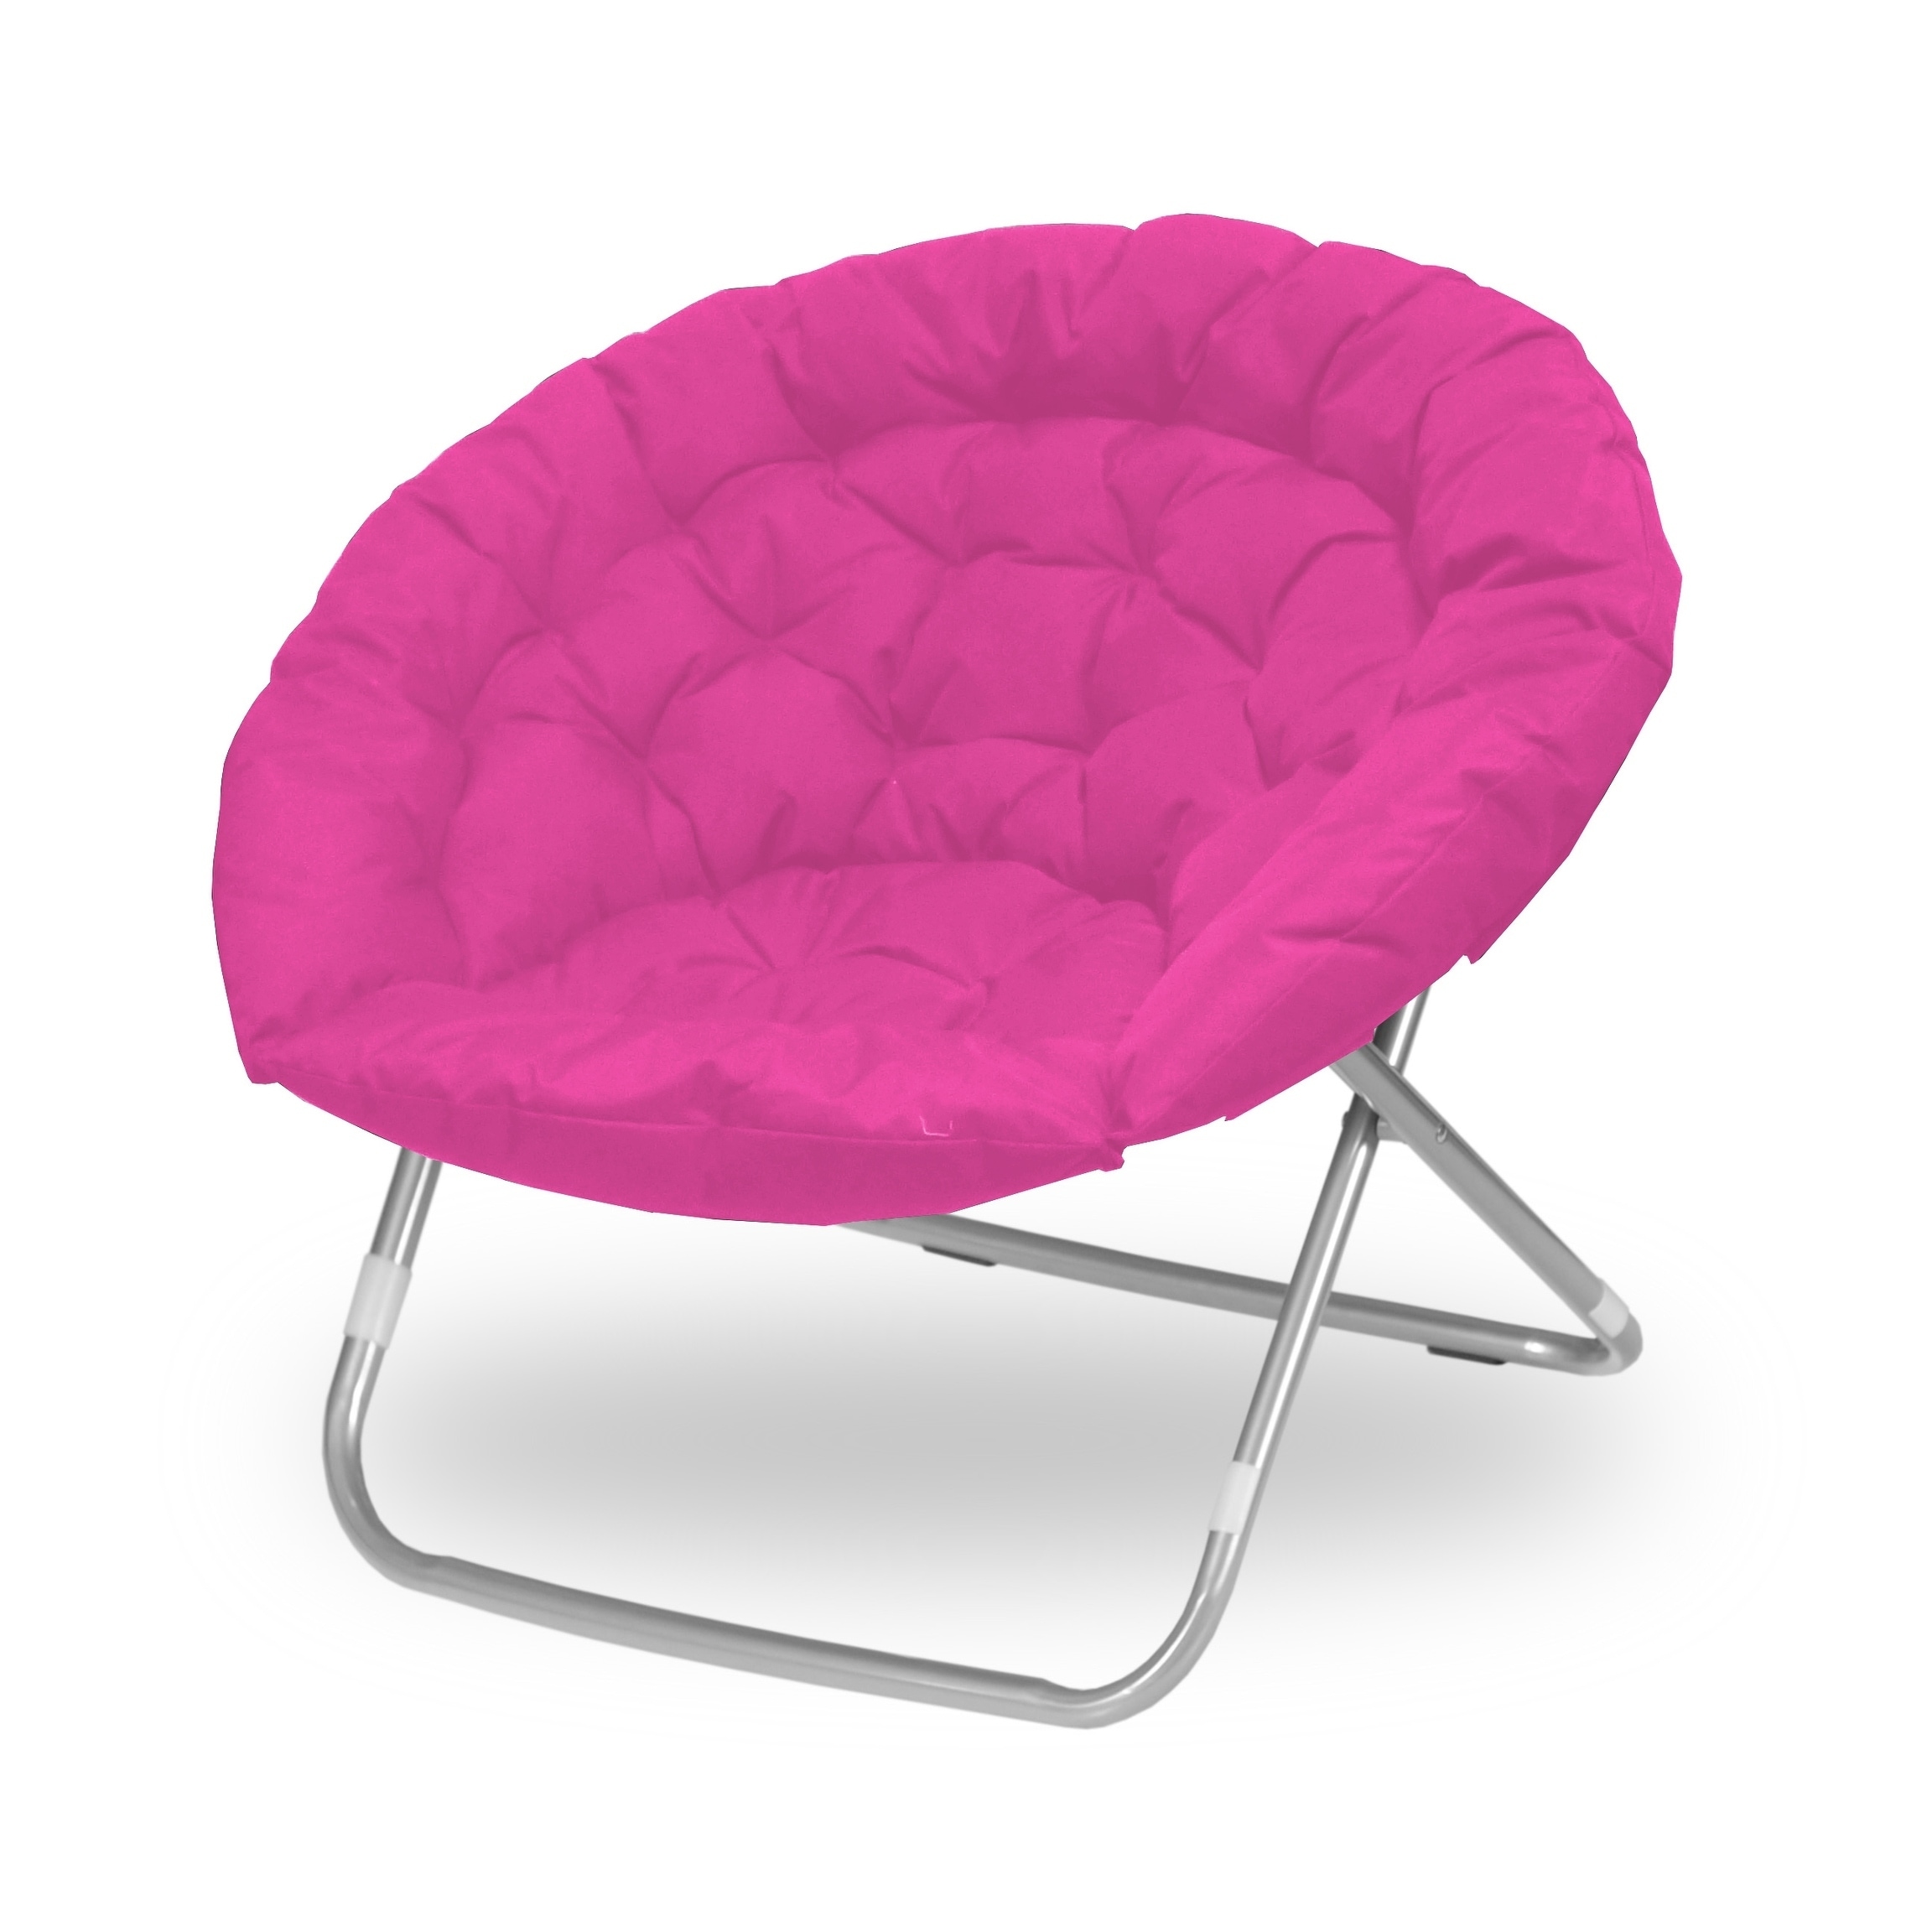 saucer chairs for tweens